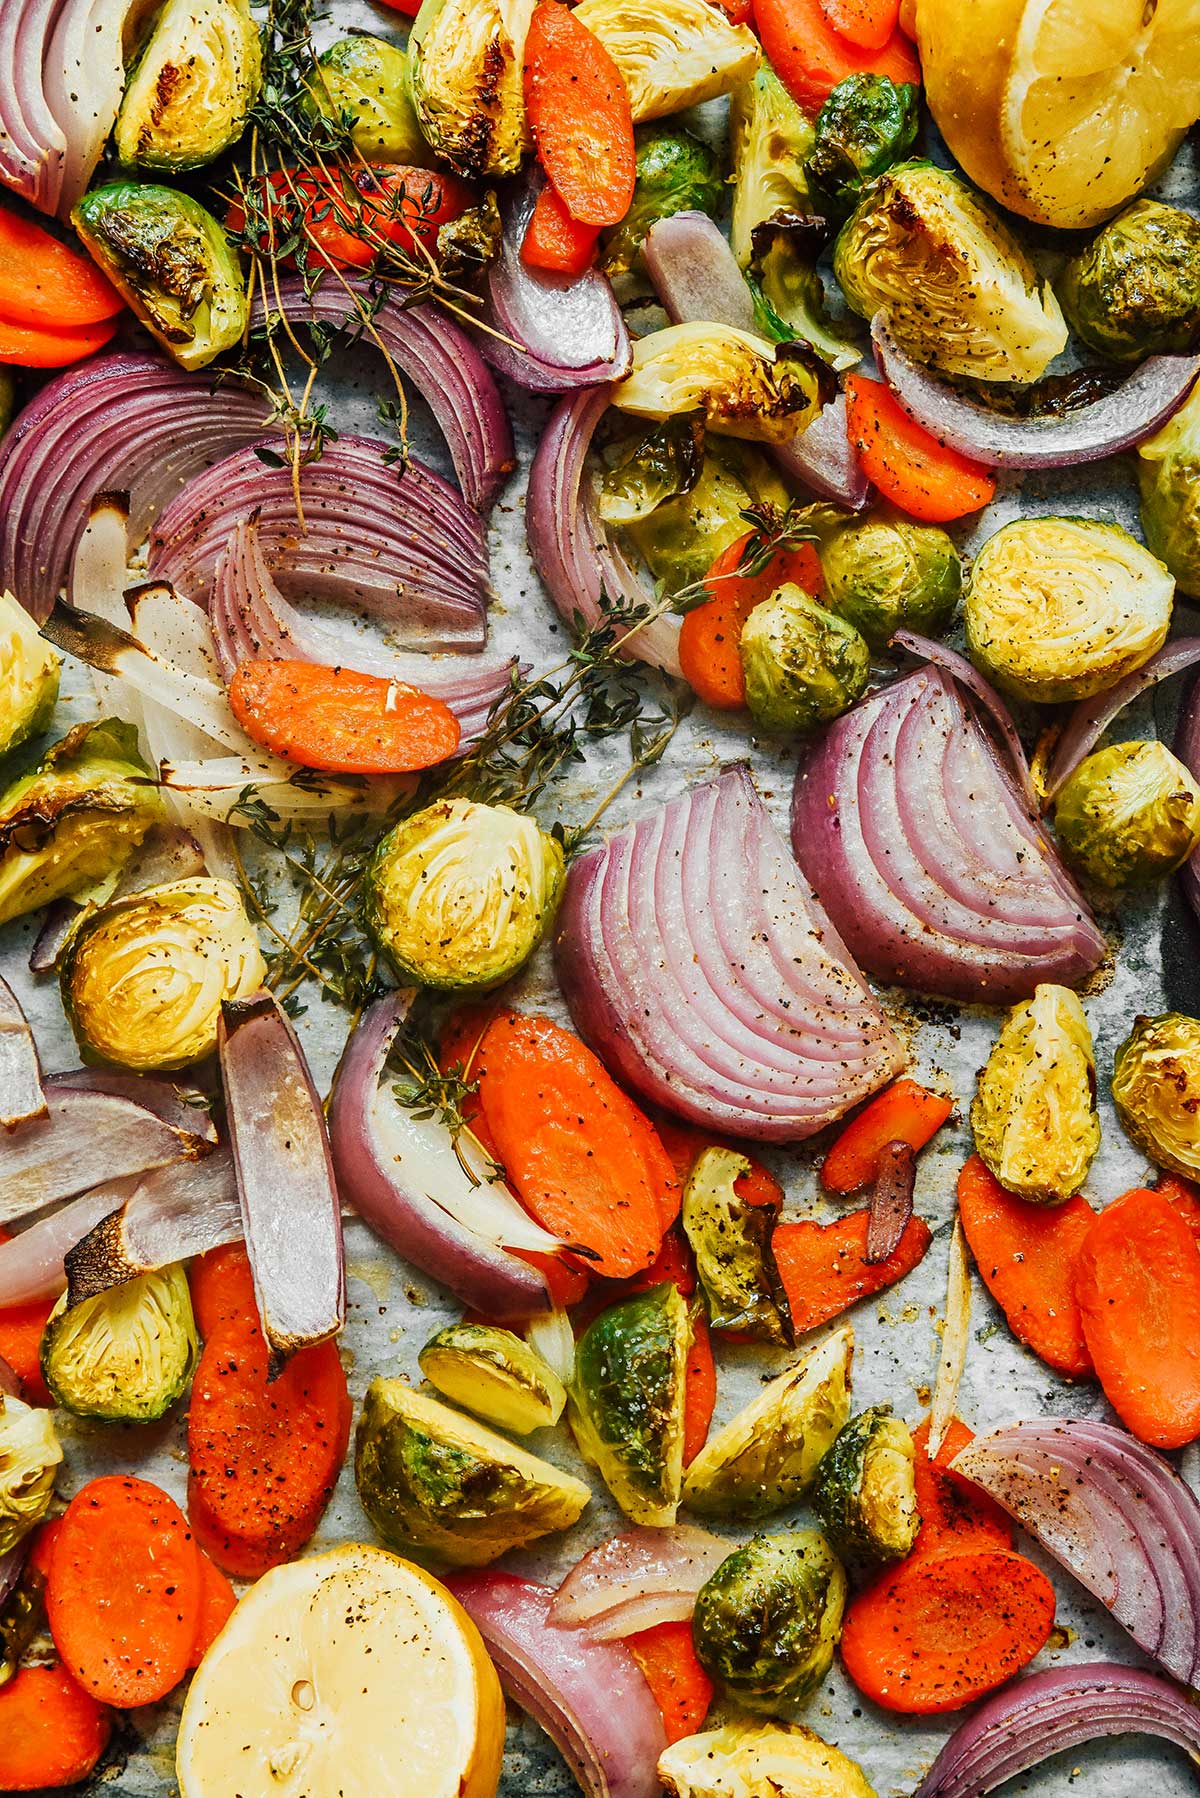 A close-up view detailing the texture of freshly roasted red onion slices, carrot slices, and halved Brussels sprouts